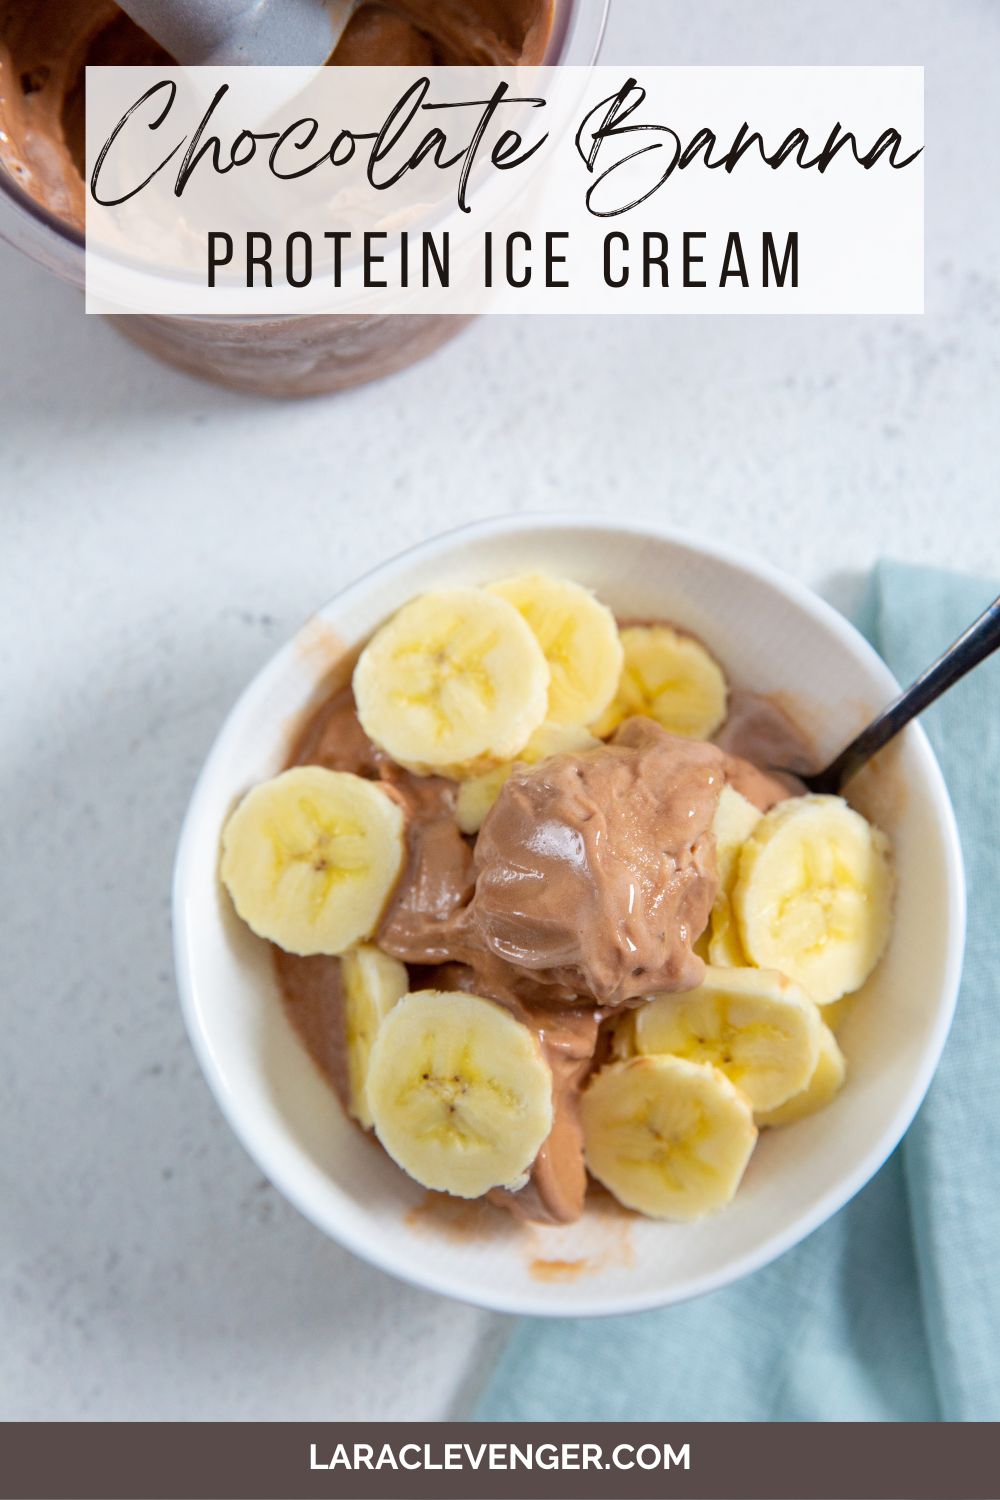 pin of Chocolate Banana Protein Ice Cream in a white bowl with banana slices on top and a spoon in it with a blue napkin next to it